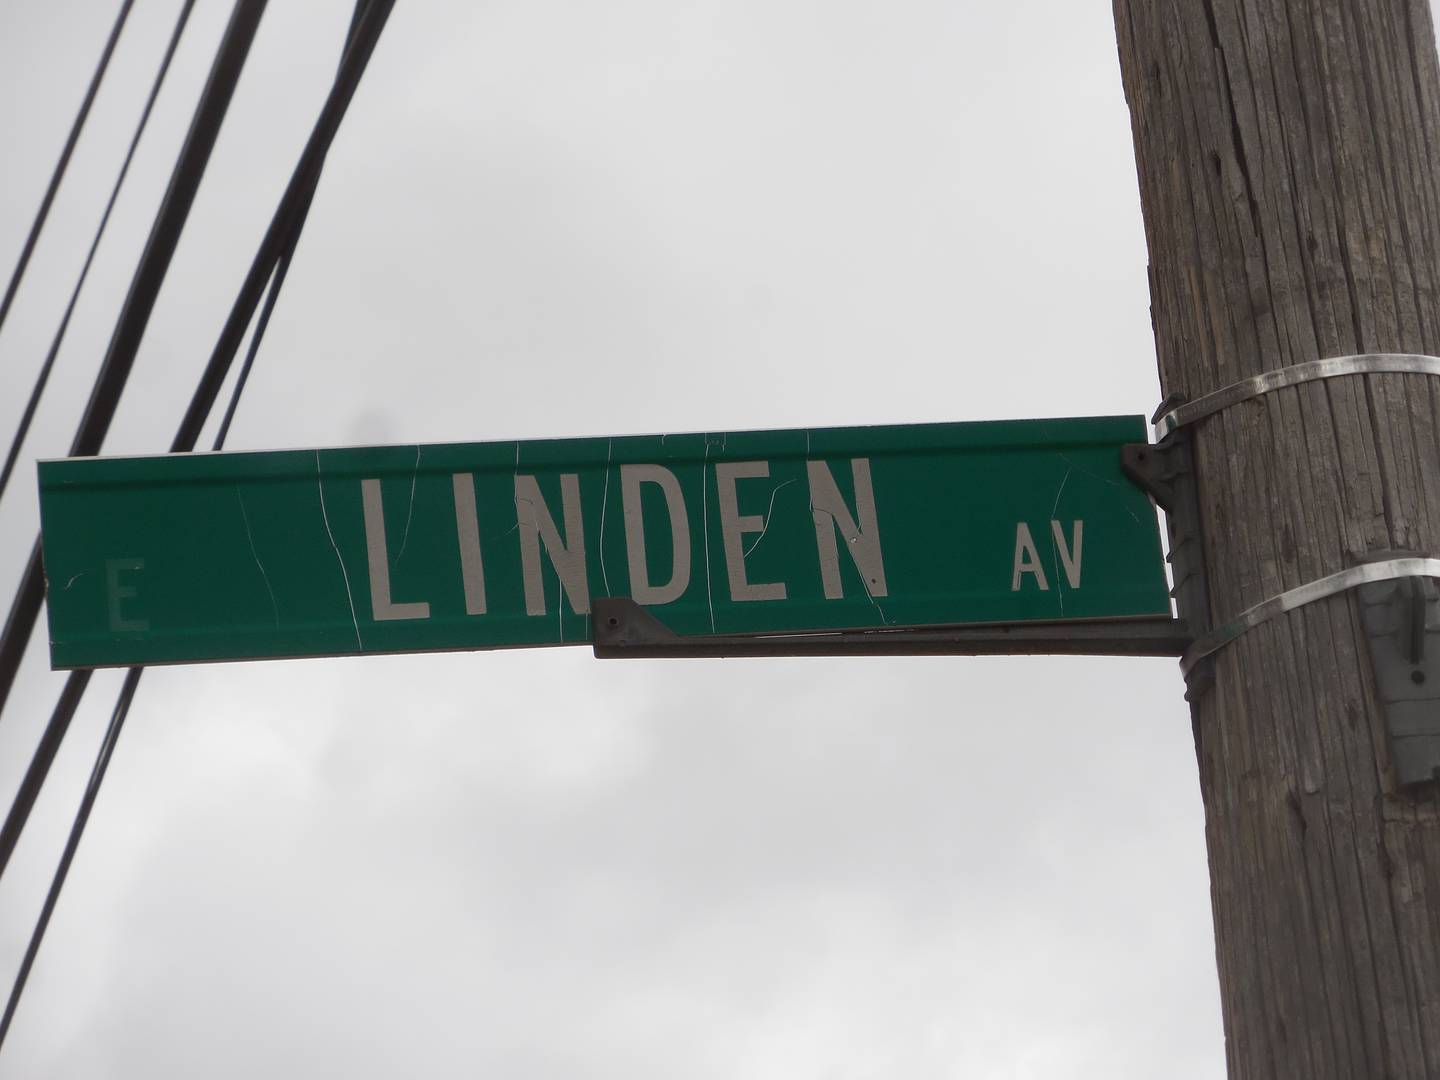 A Joliet police officer shot an armed man who fled a traffic stop on Linden Avenue Wednesday night, police said.